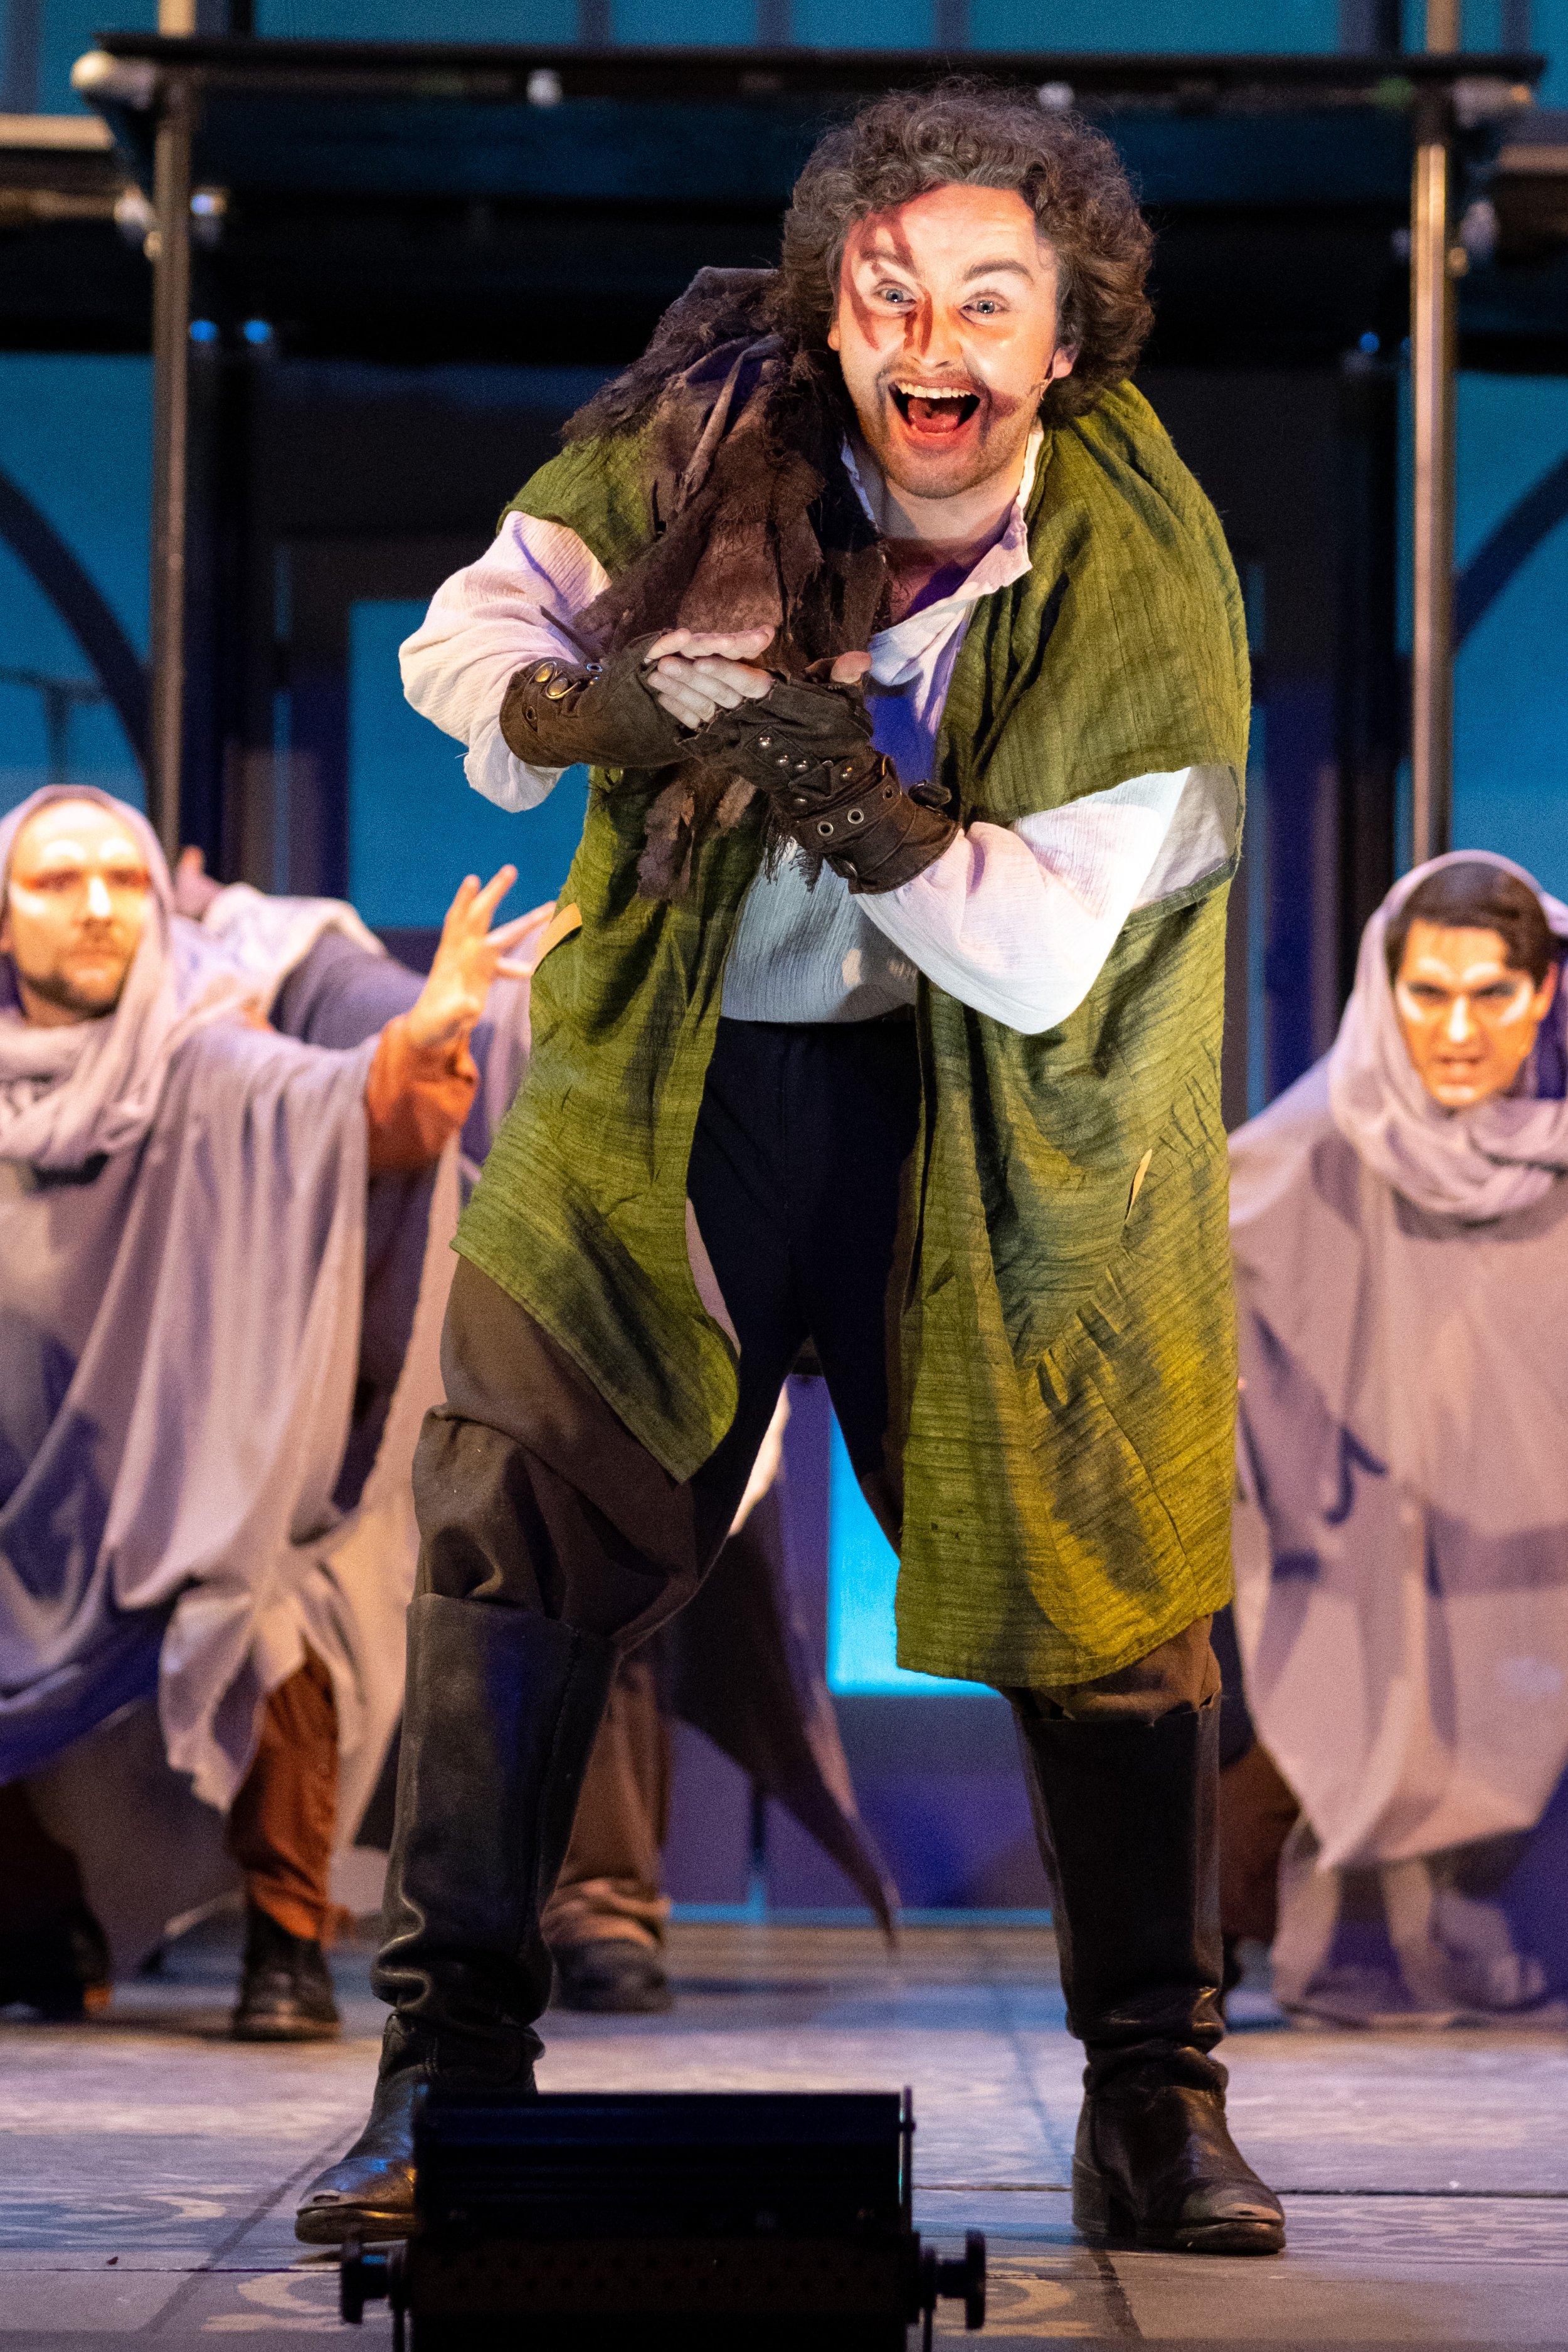  Elliott Moore plays Quasimodo, the deformed bell-ringer of Notre Dame, in the musical production, The Hunchback of Notre Dame, during rehearsal on Thursday, March 30, 2023 at Santa Monica College Theare Arts and Music Departments Main Stage. (Akemi 